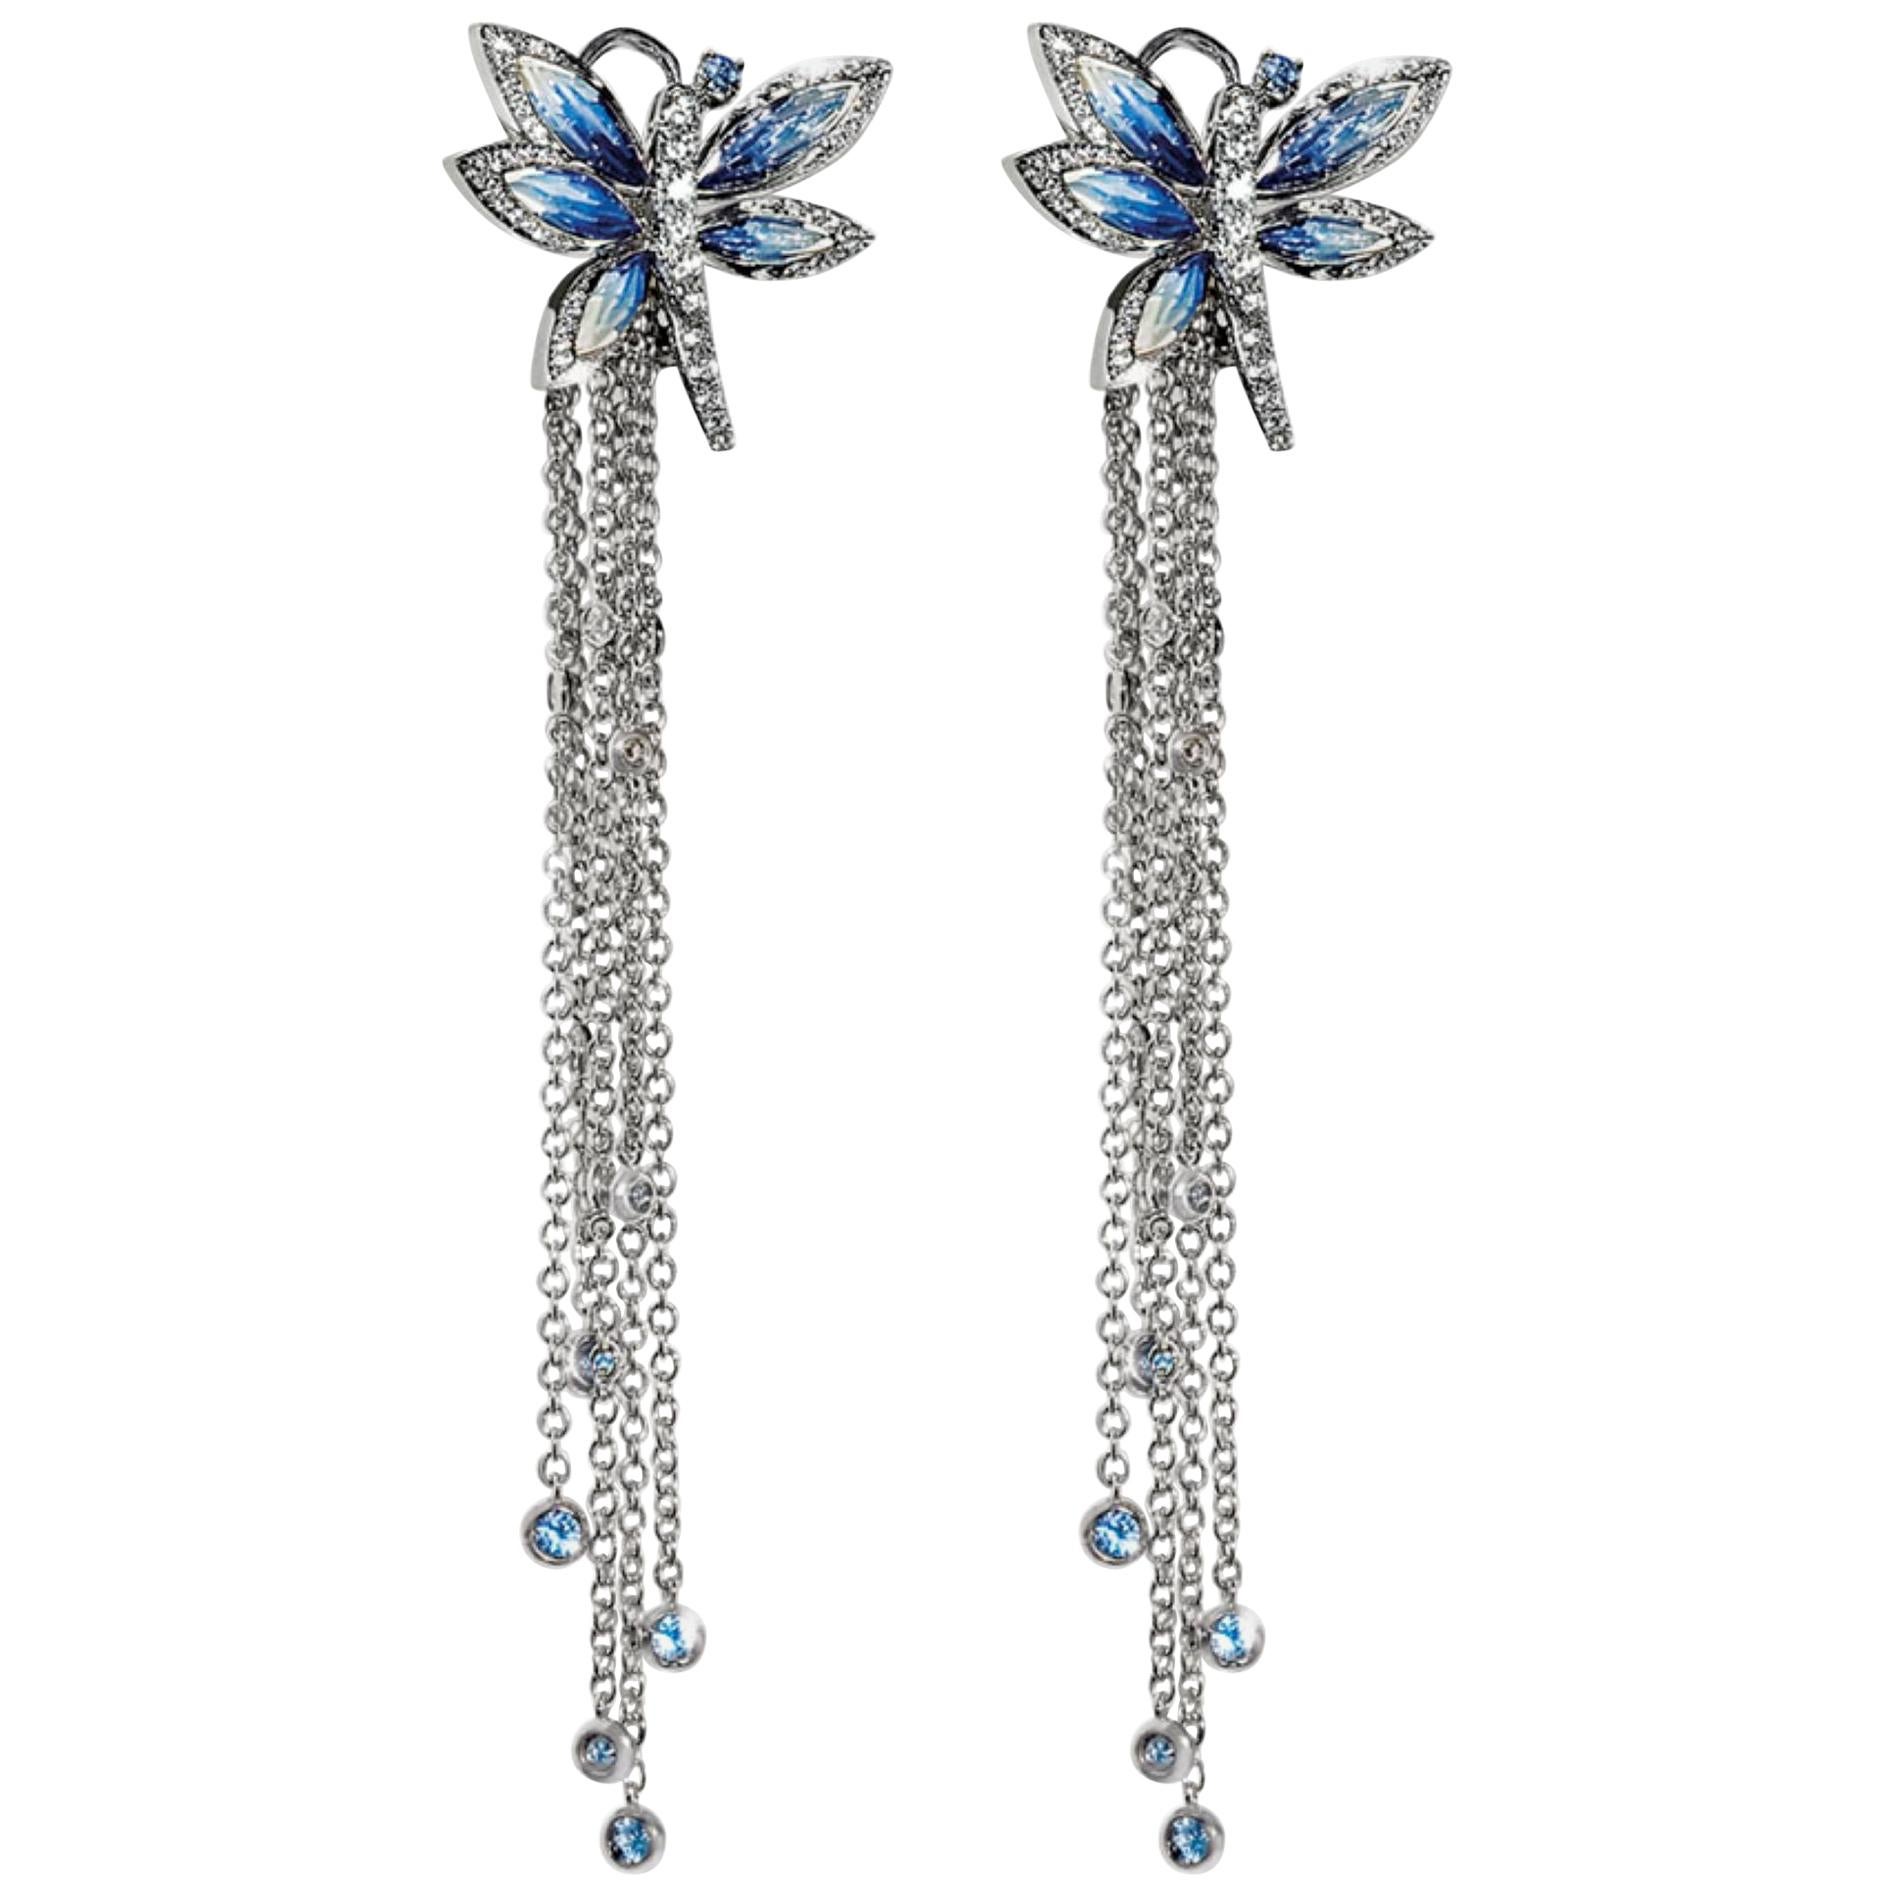 Earrings White Gold White Diamonds Sapphires Hand Decoated with Micro Mosaic